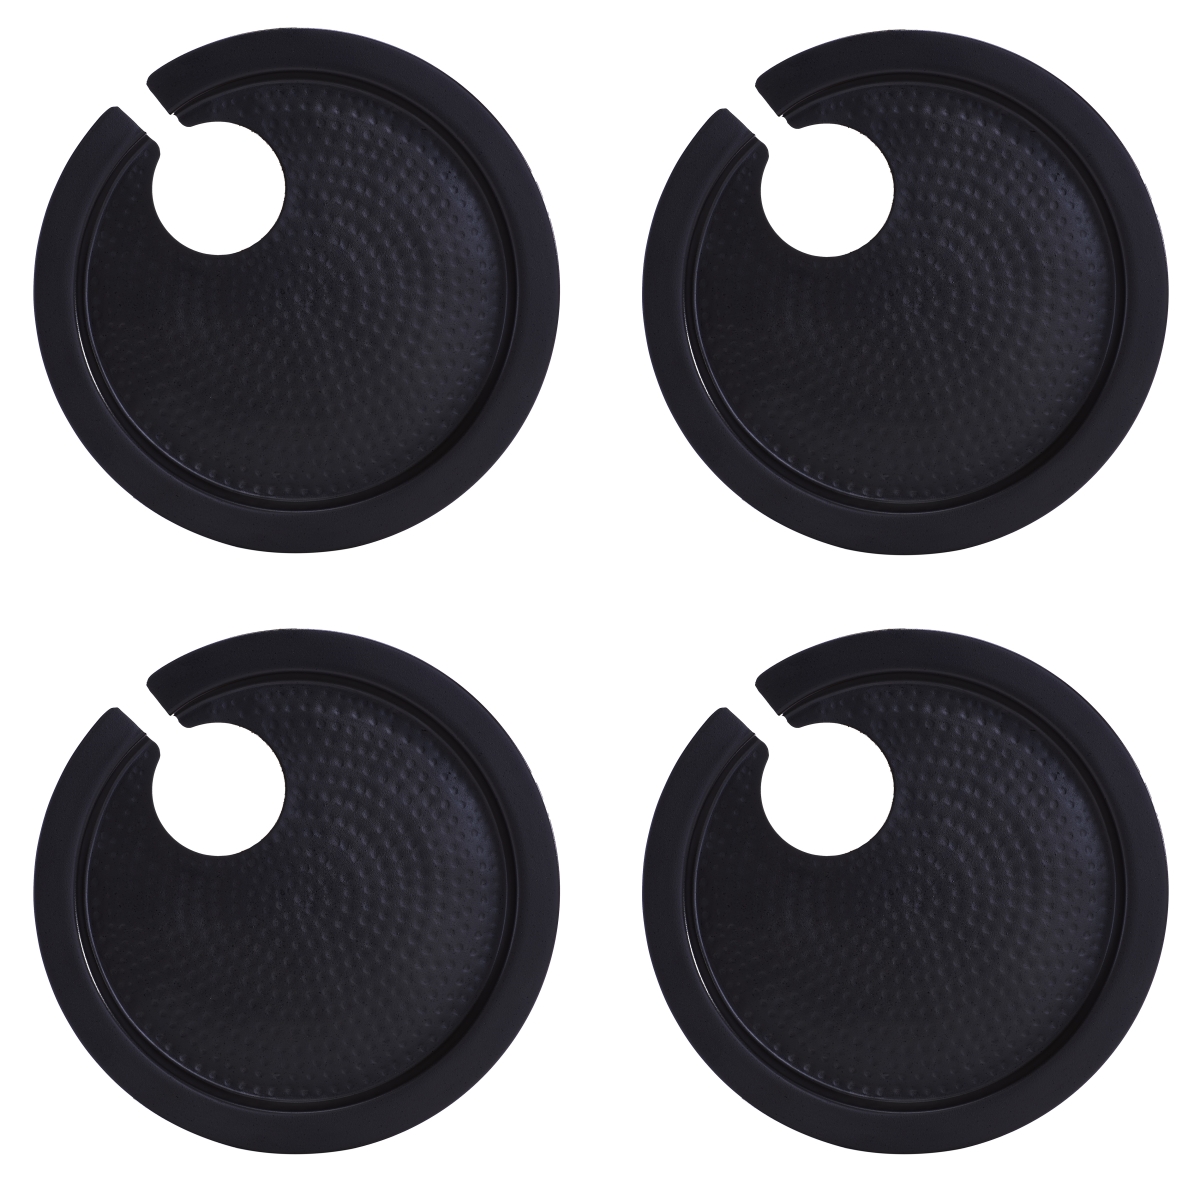 5470mb 9.75 In. Hammered Buffet Plates With Wine Glass Holder - Matte Black